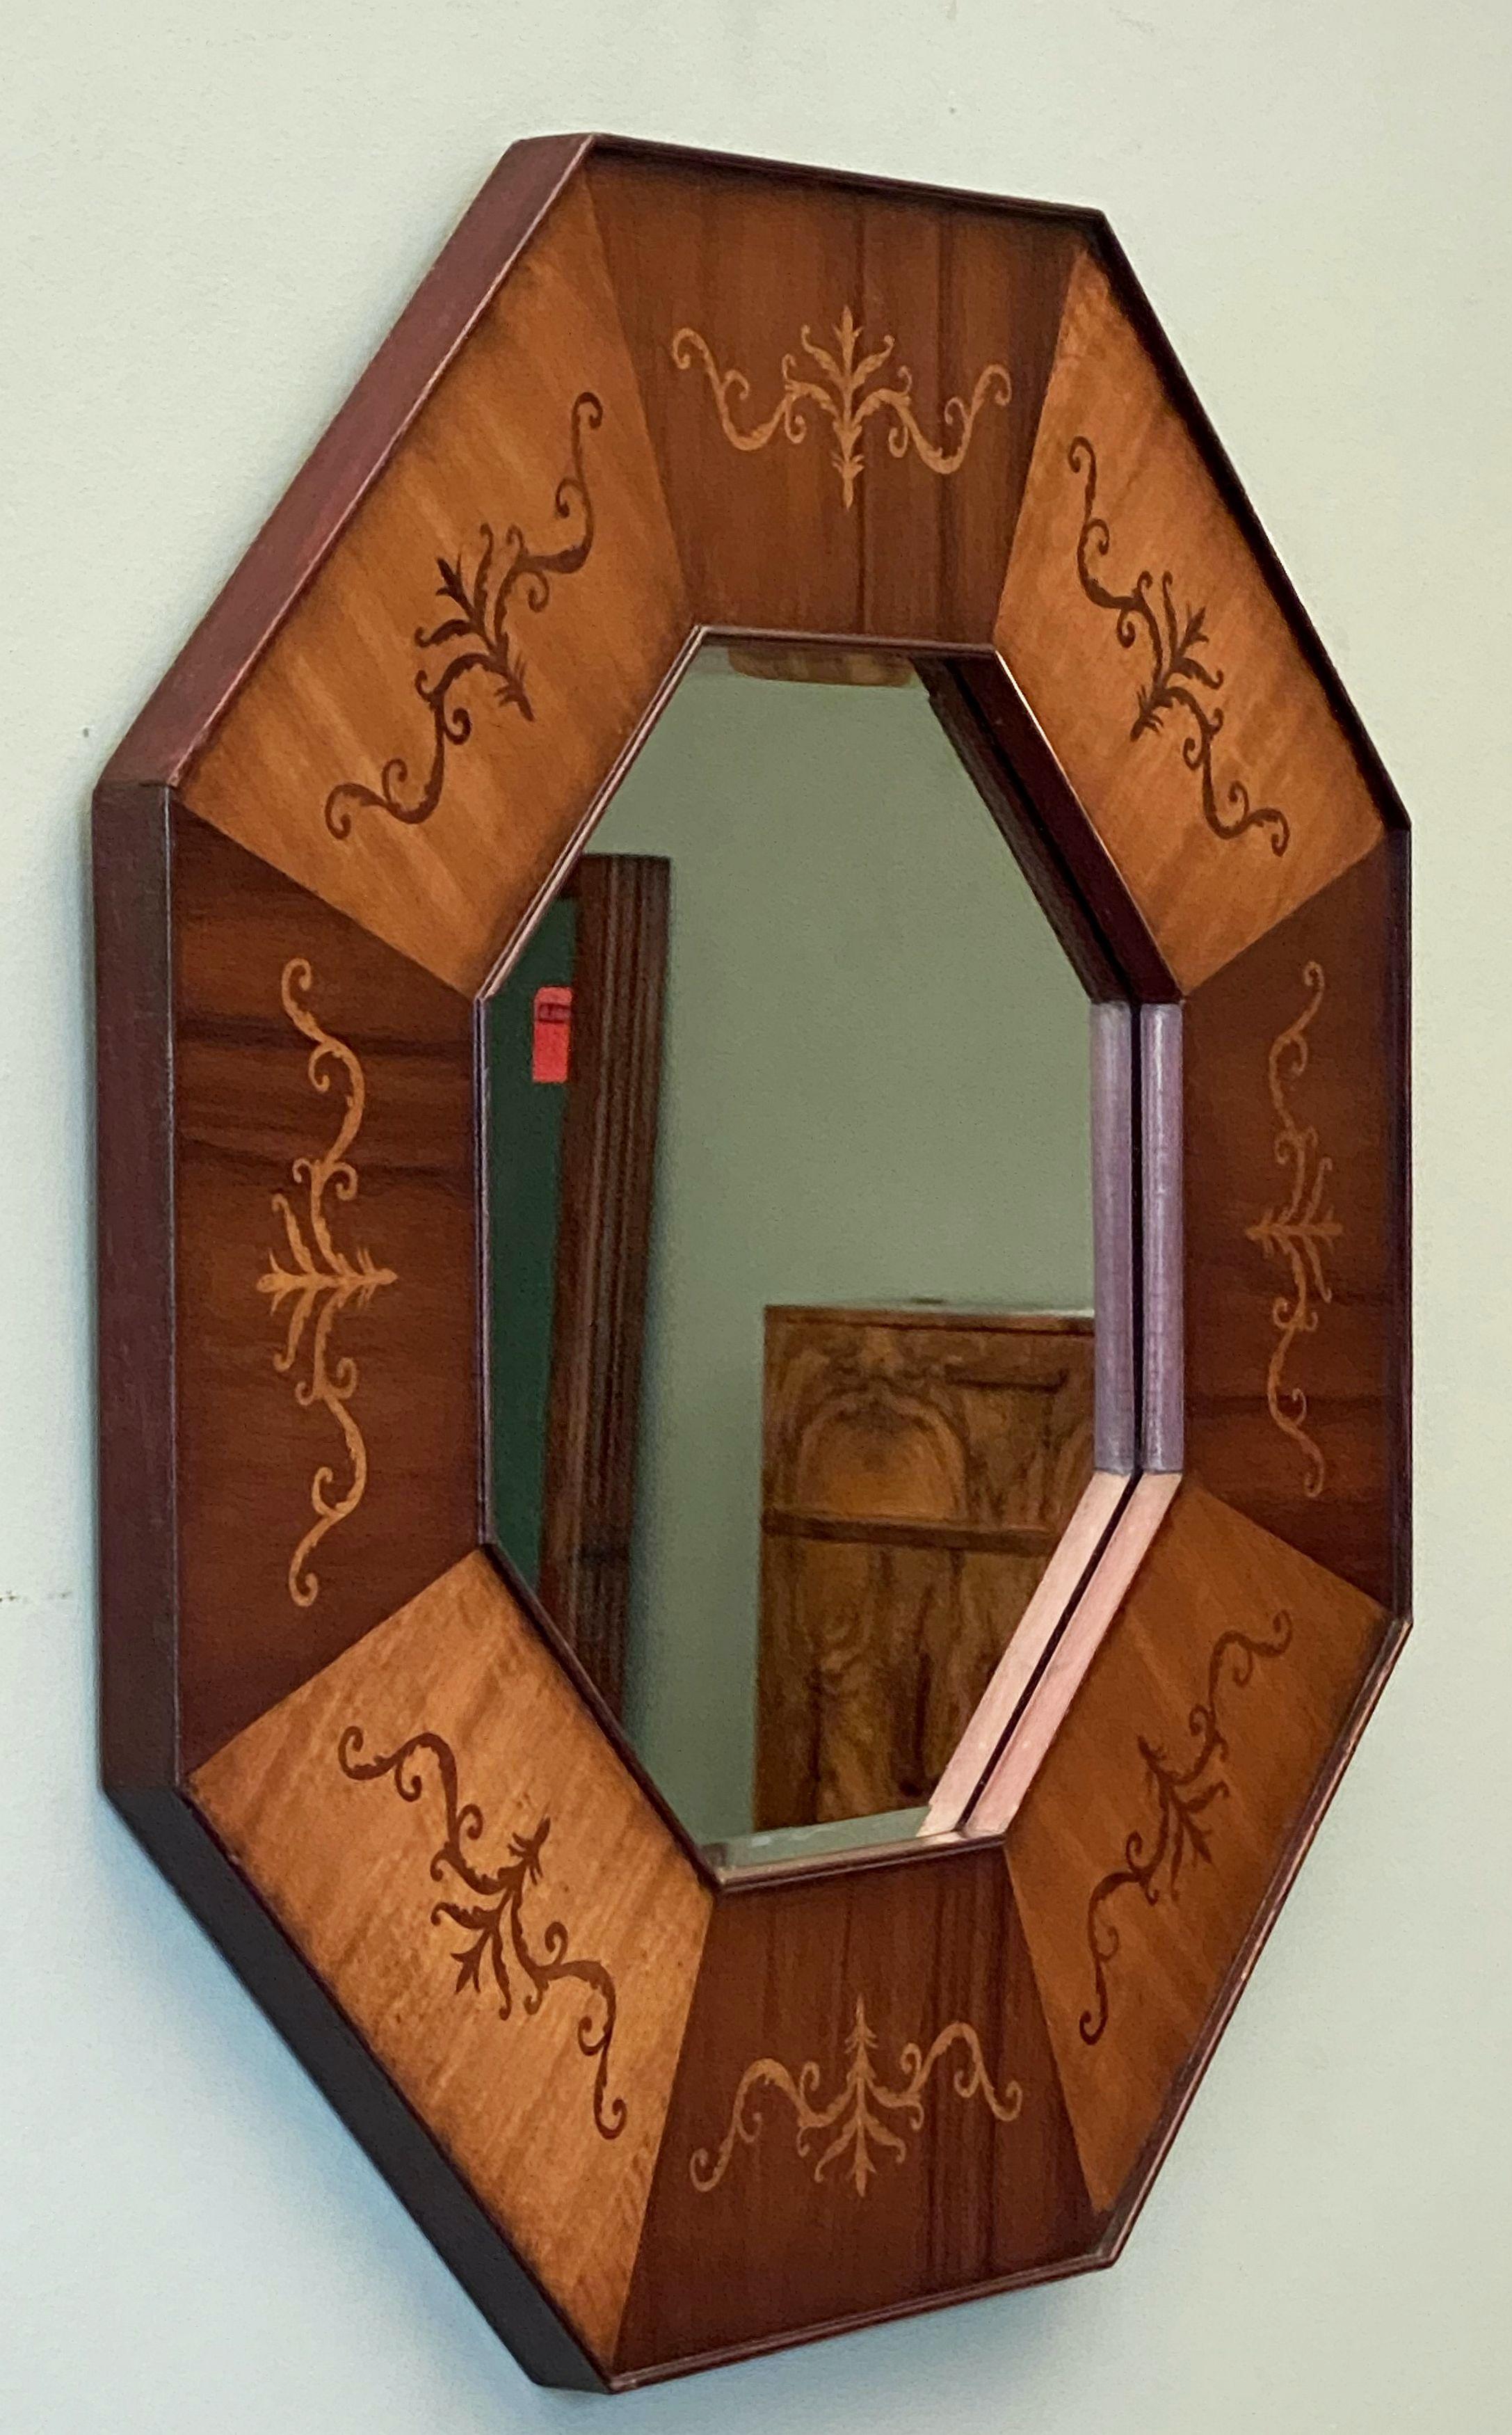 A fine English octagonal wall mirror featuring an eight-sided moulded panel frame of inlaid mahogany, with a scrollwork design to each panel, surrounding a beveled mirrored glass center.

Measure: Diameter is 26 1/2 inches.